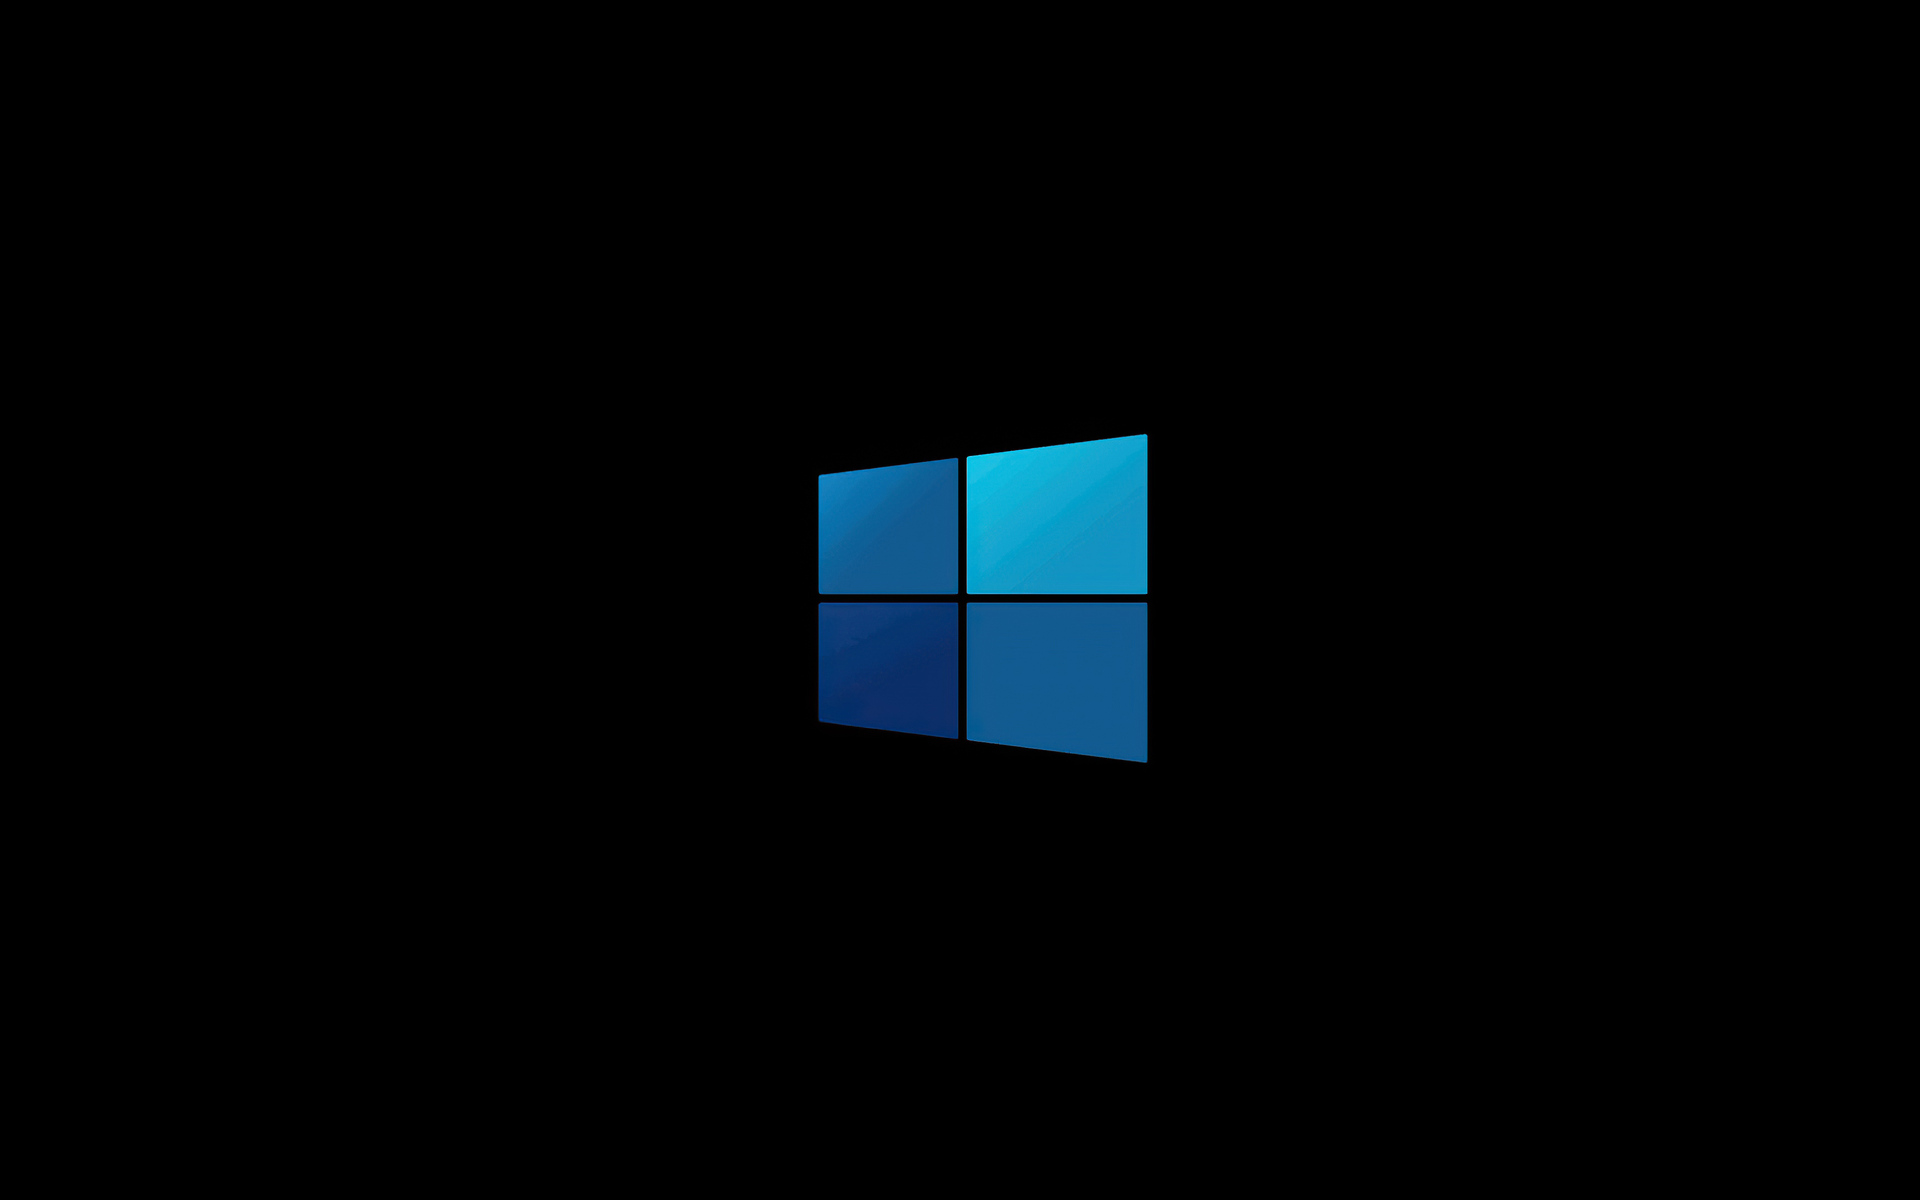 19x10 Windows 10 Minimal Logo 4k 1080p Resolution Hd 4k Wallpapers Images Backgrounds Photos And Pictures